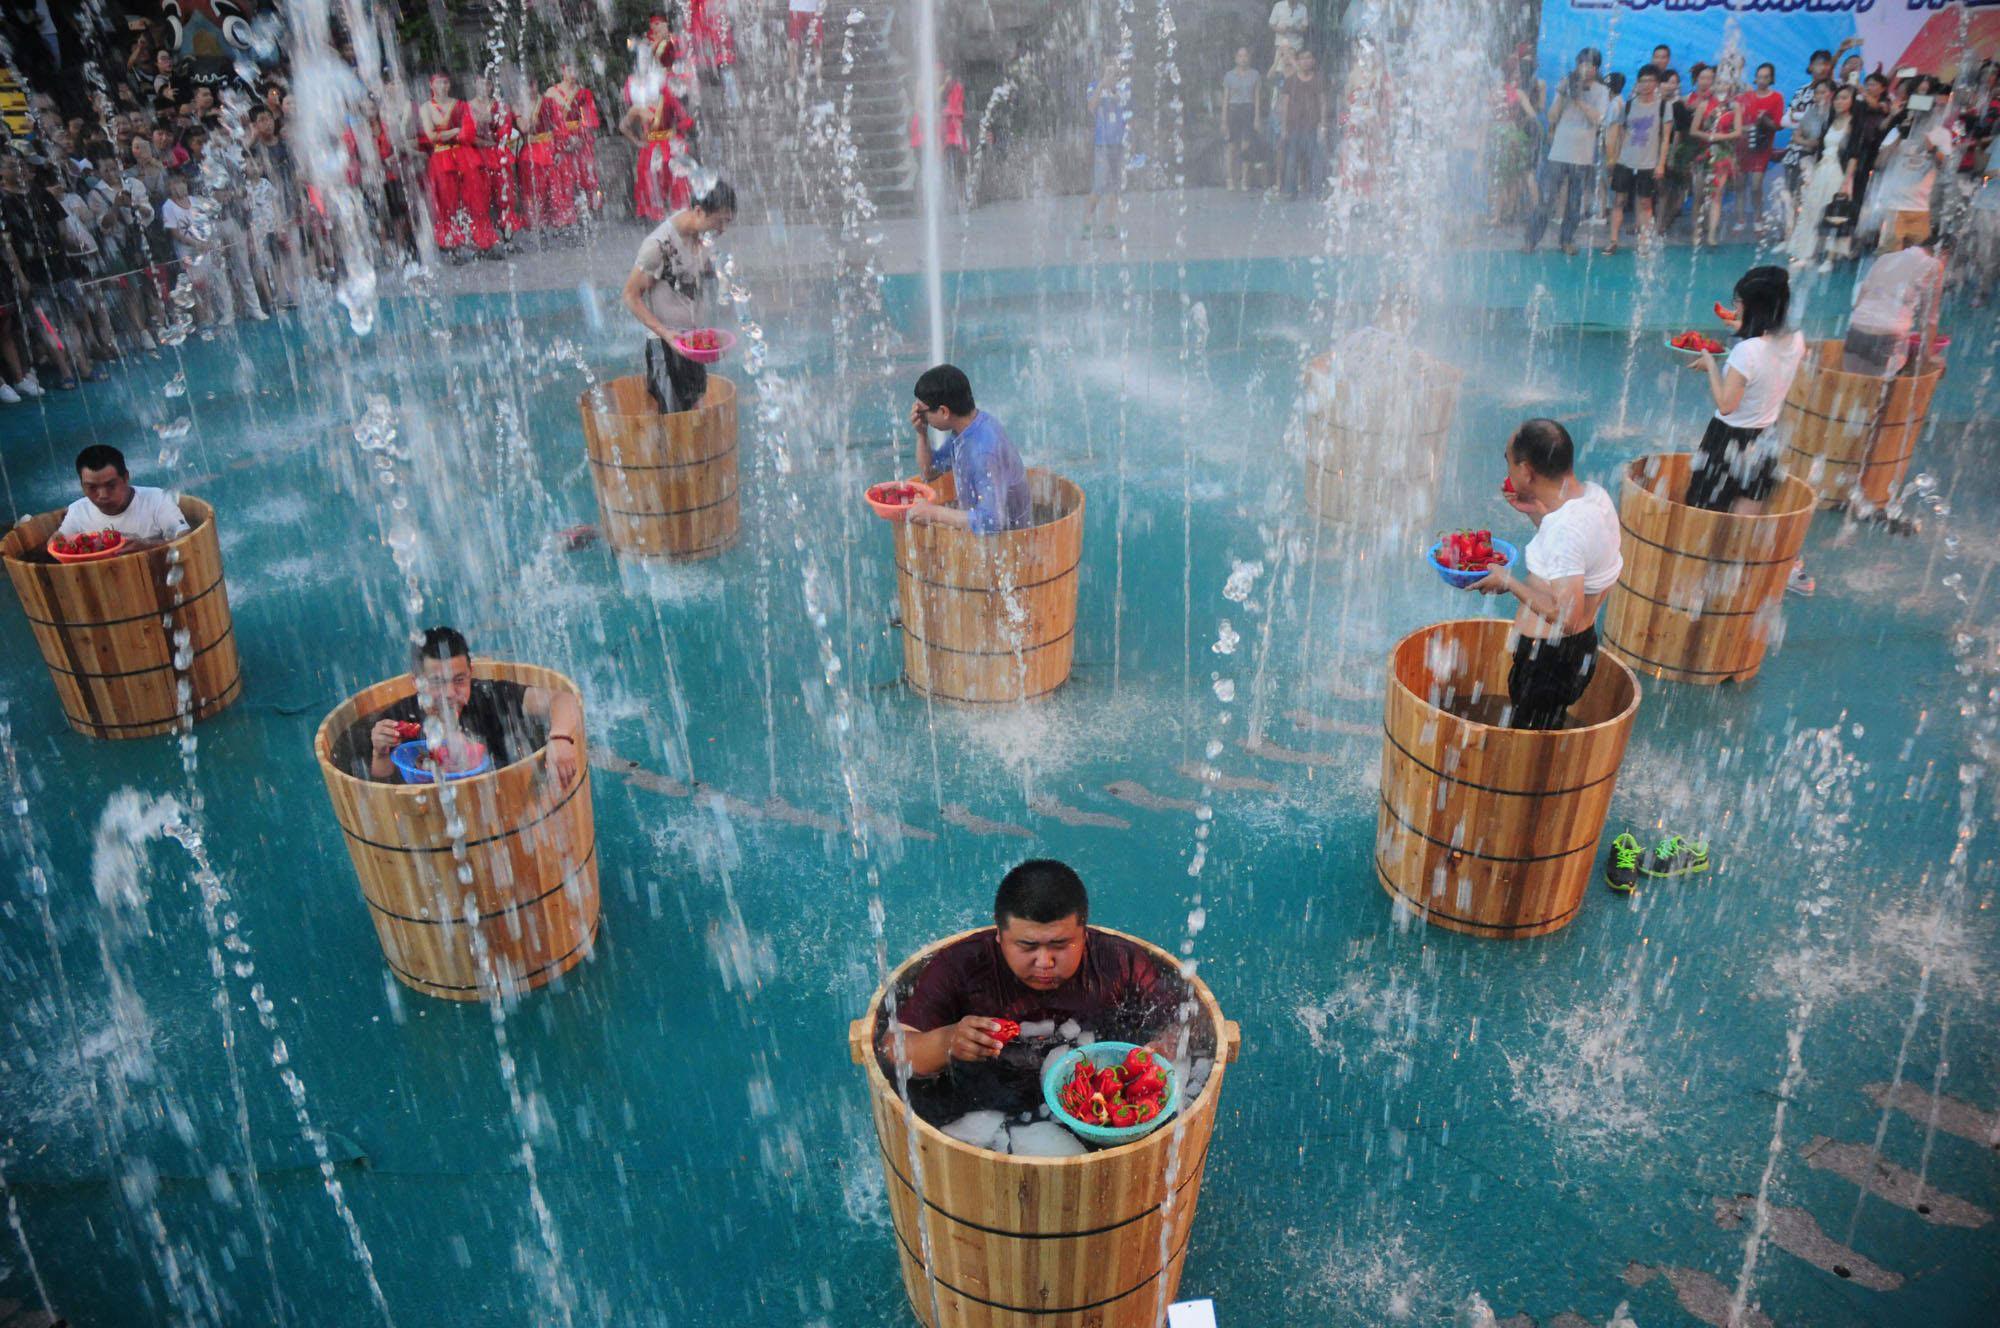 Participants eat chili as they bath in ice water during a chili eating competition in Hangzhou